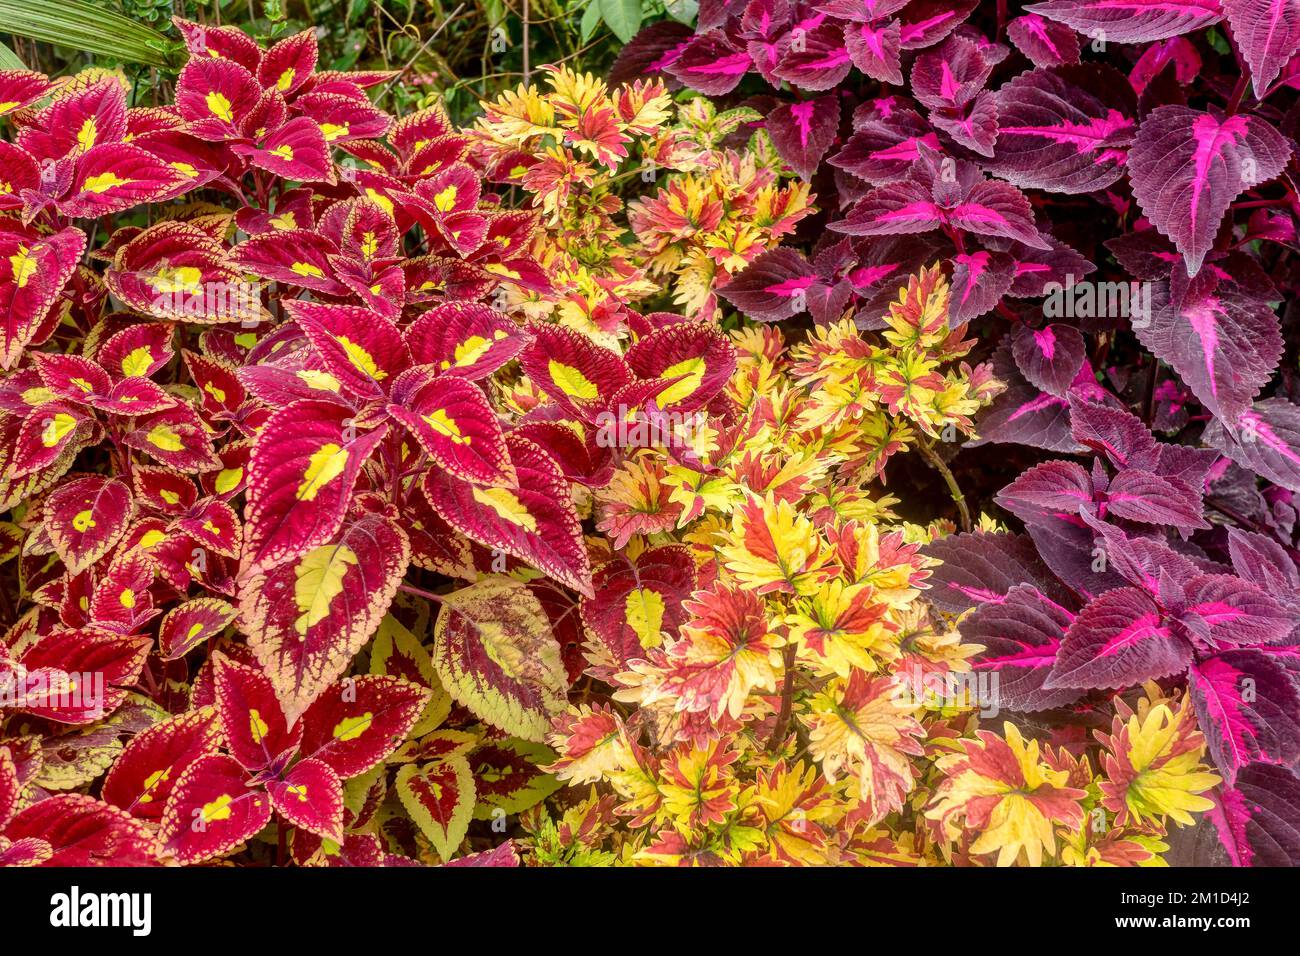 The colorful foliage of coleus (Solenostemon scutellarioides), perennial ornamental tropical plants in the family Lamiaceae, native to southeast Asia. Stock Photo